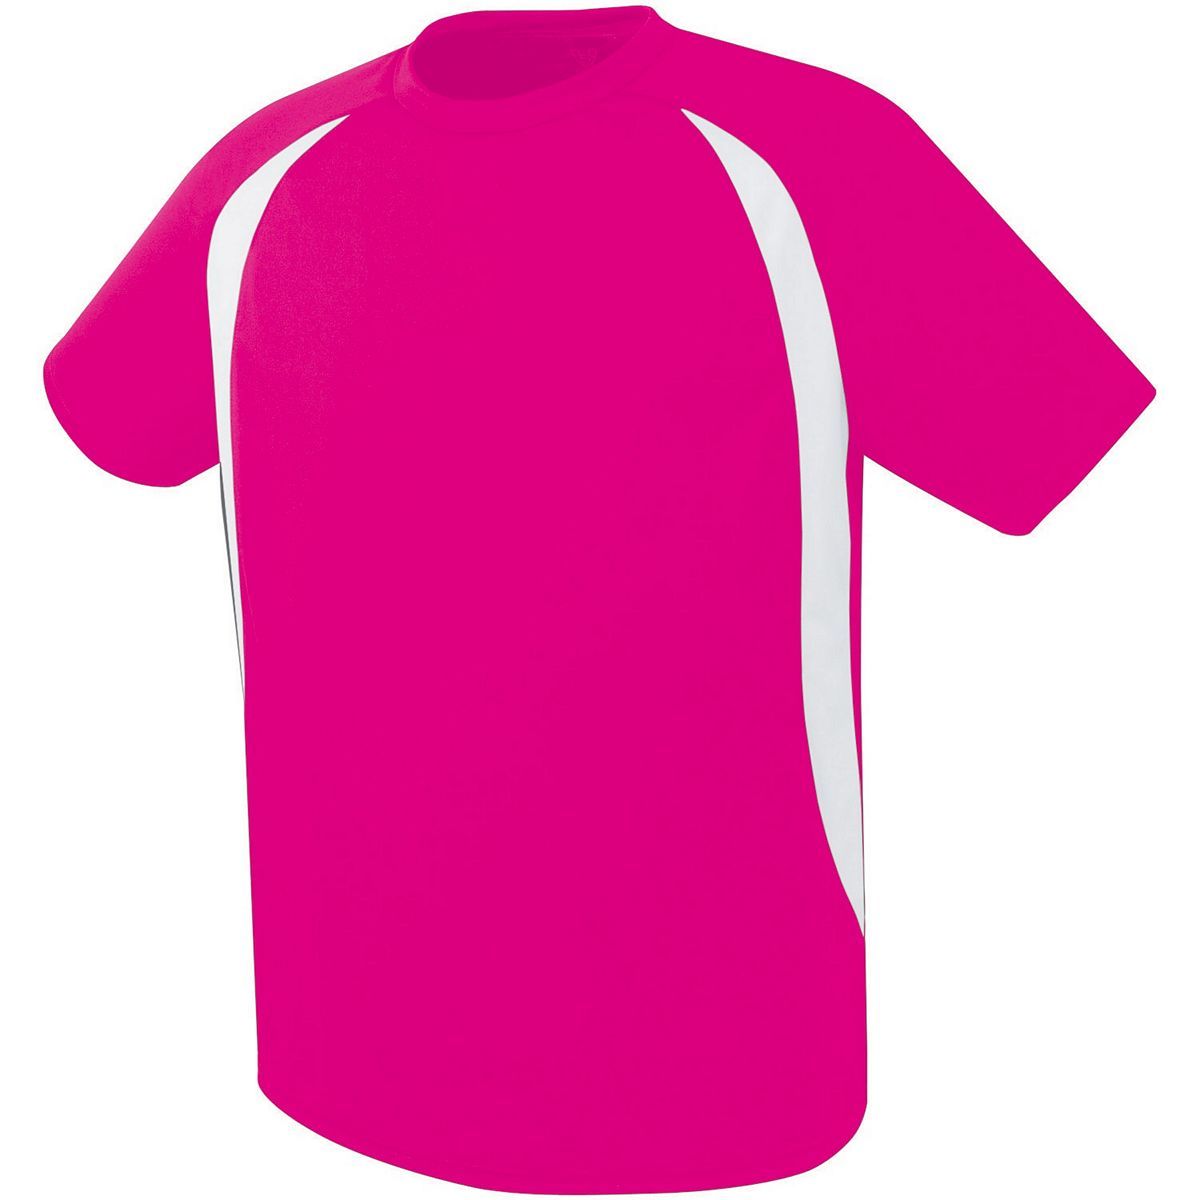 High 5 Youth Liberty Soccer Jersey in Raspberry/White  -Part of the Youth, Youth-Jersey, High5-Products, Soccer, Shirts, All-Sports-1 product lines at KanaleyCreations.com